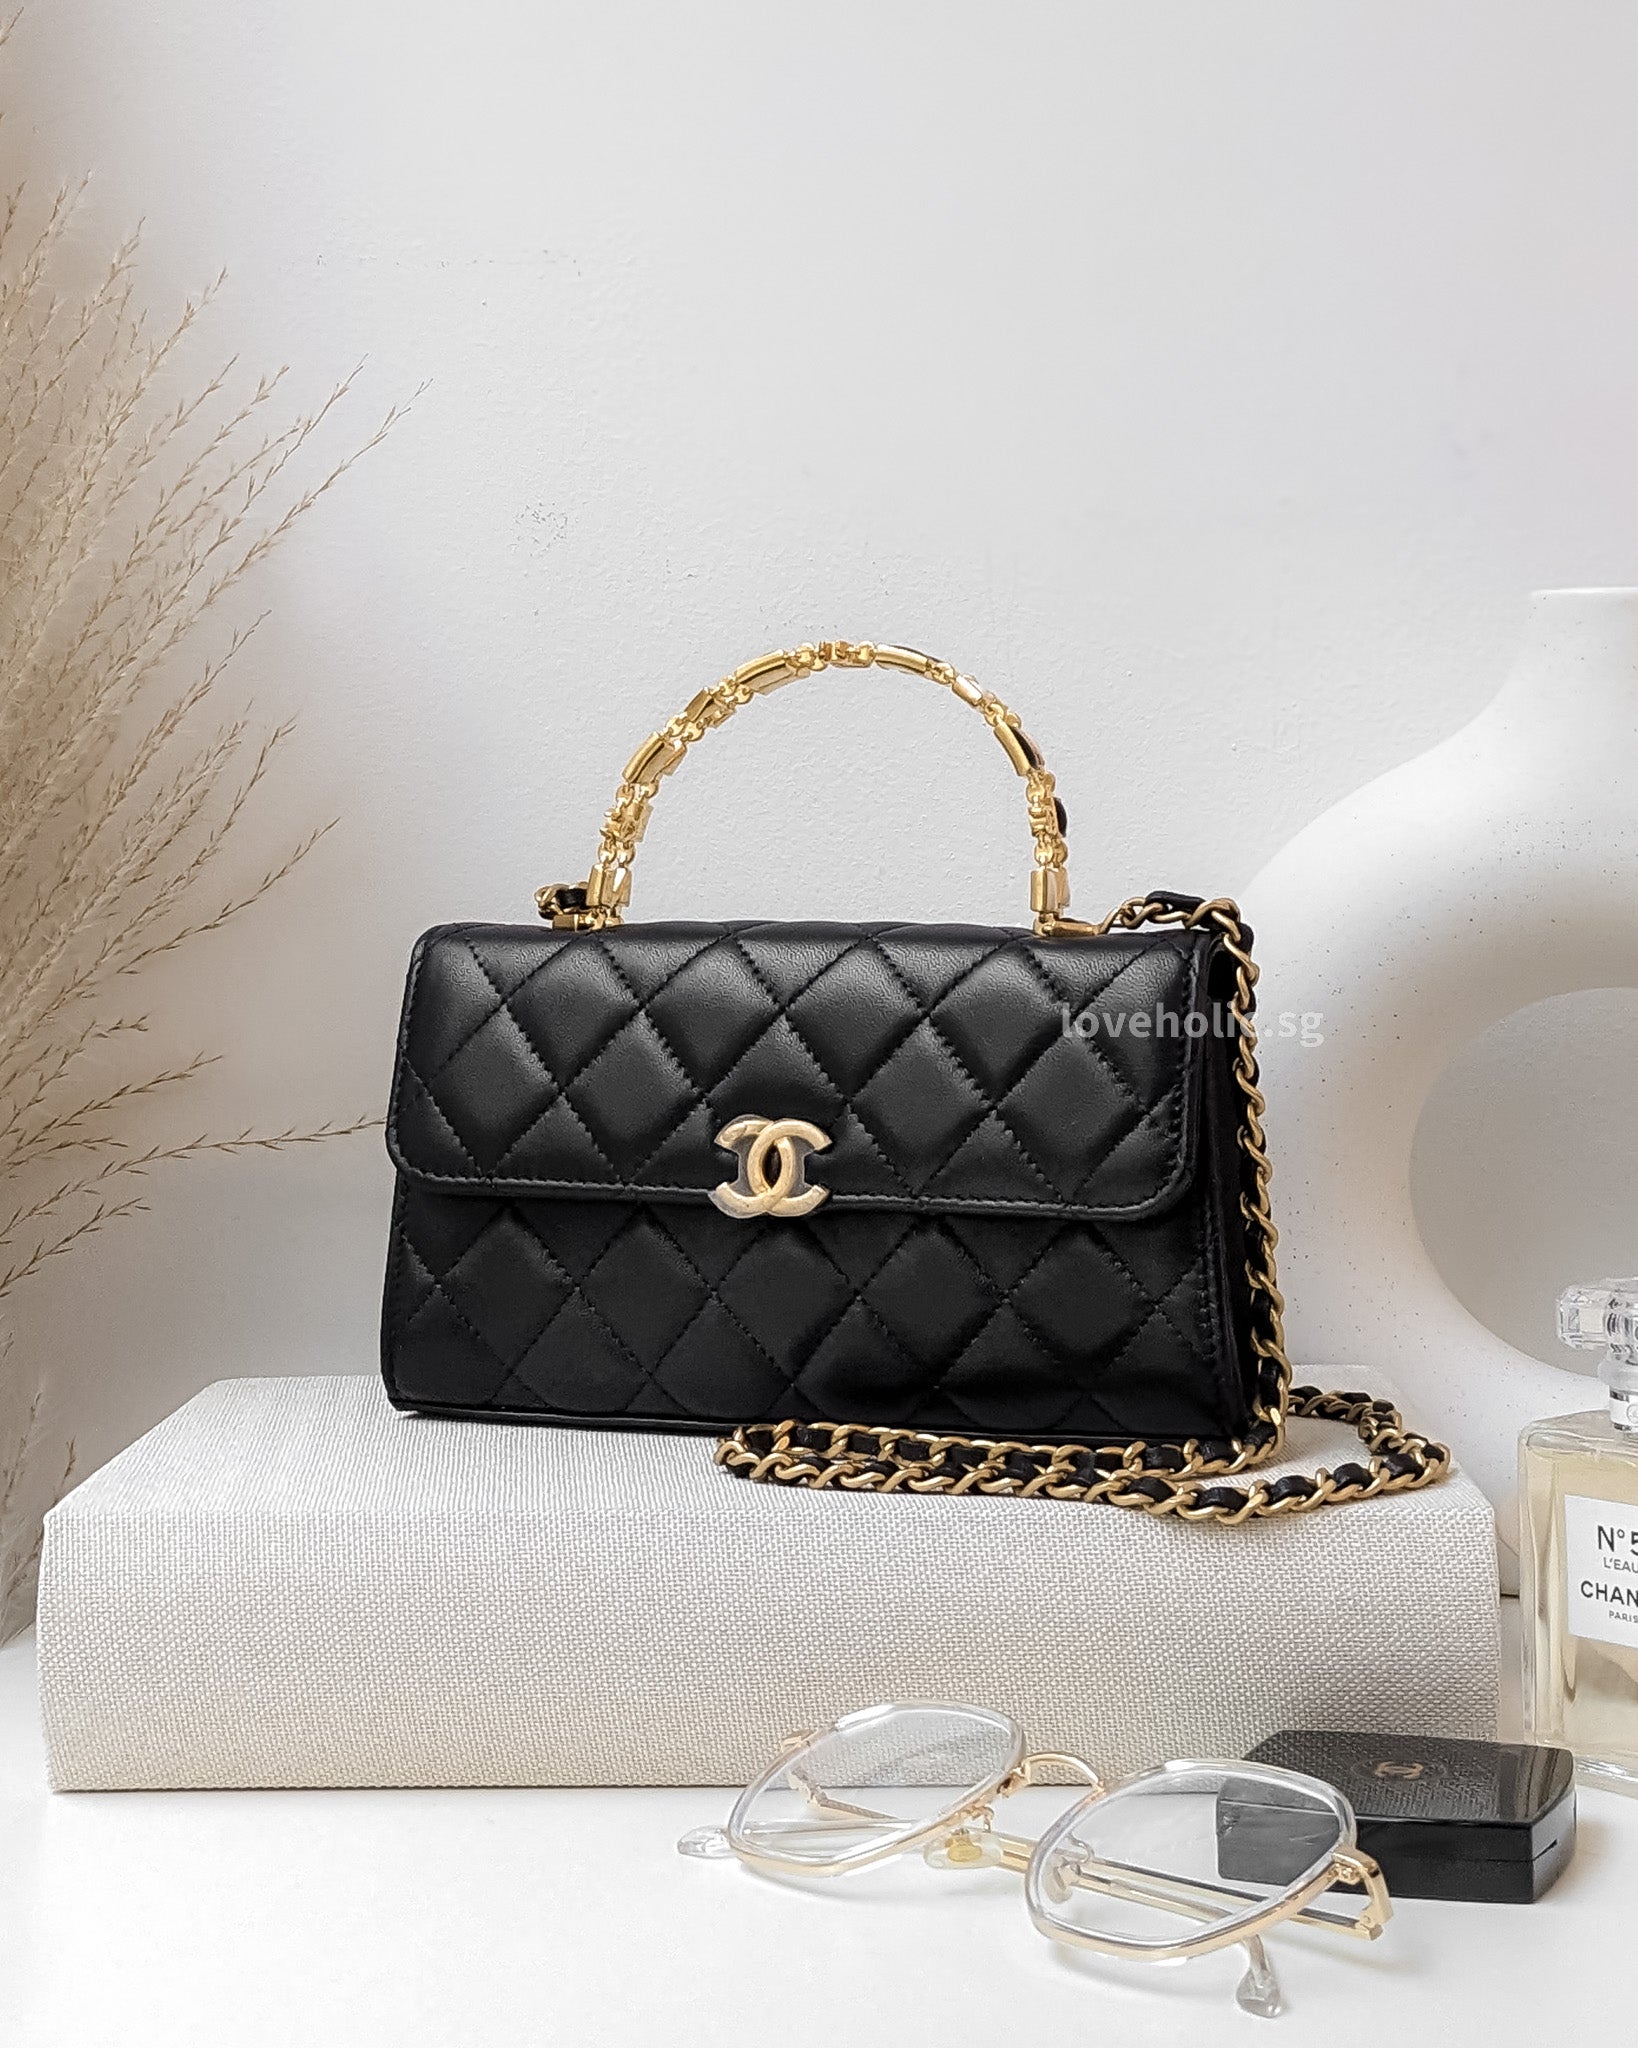 Chanel - authentic luxury pieces curated by Loveholic – Page 2 